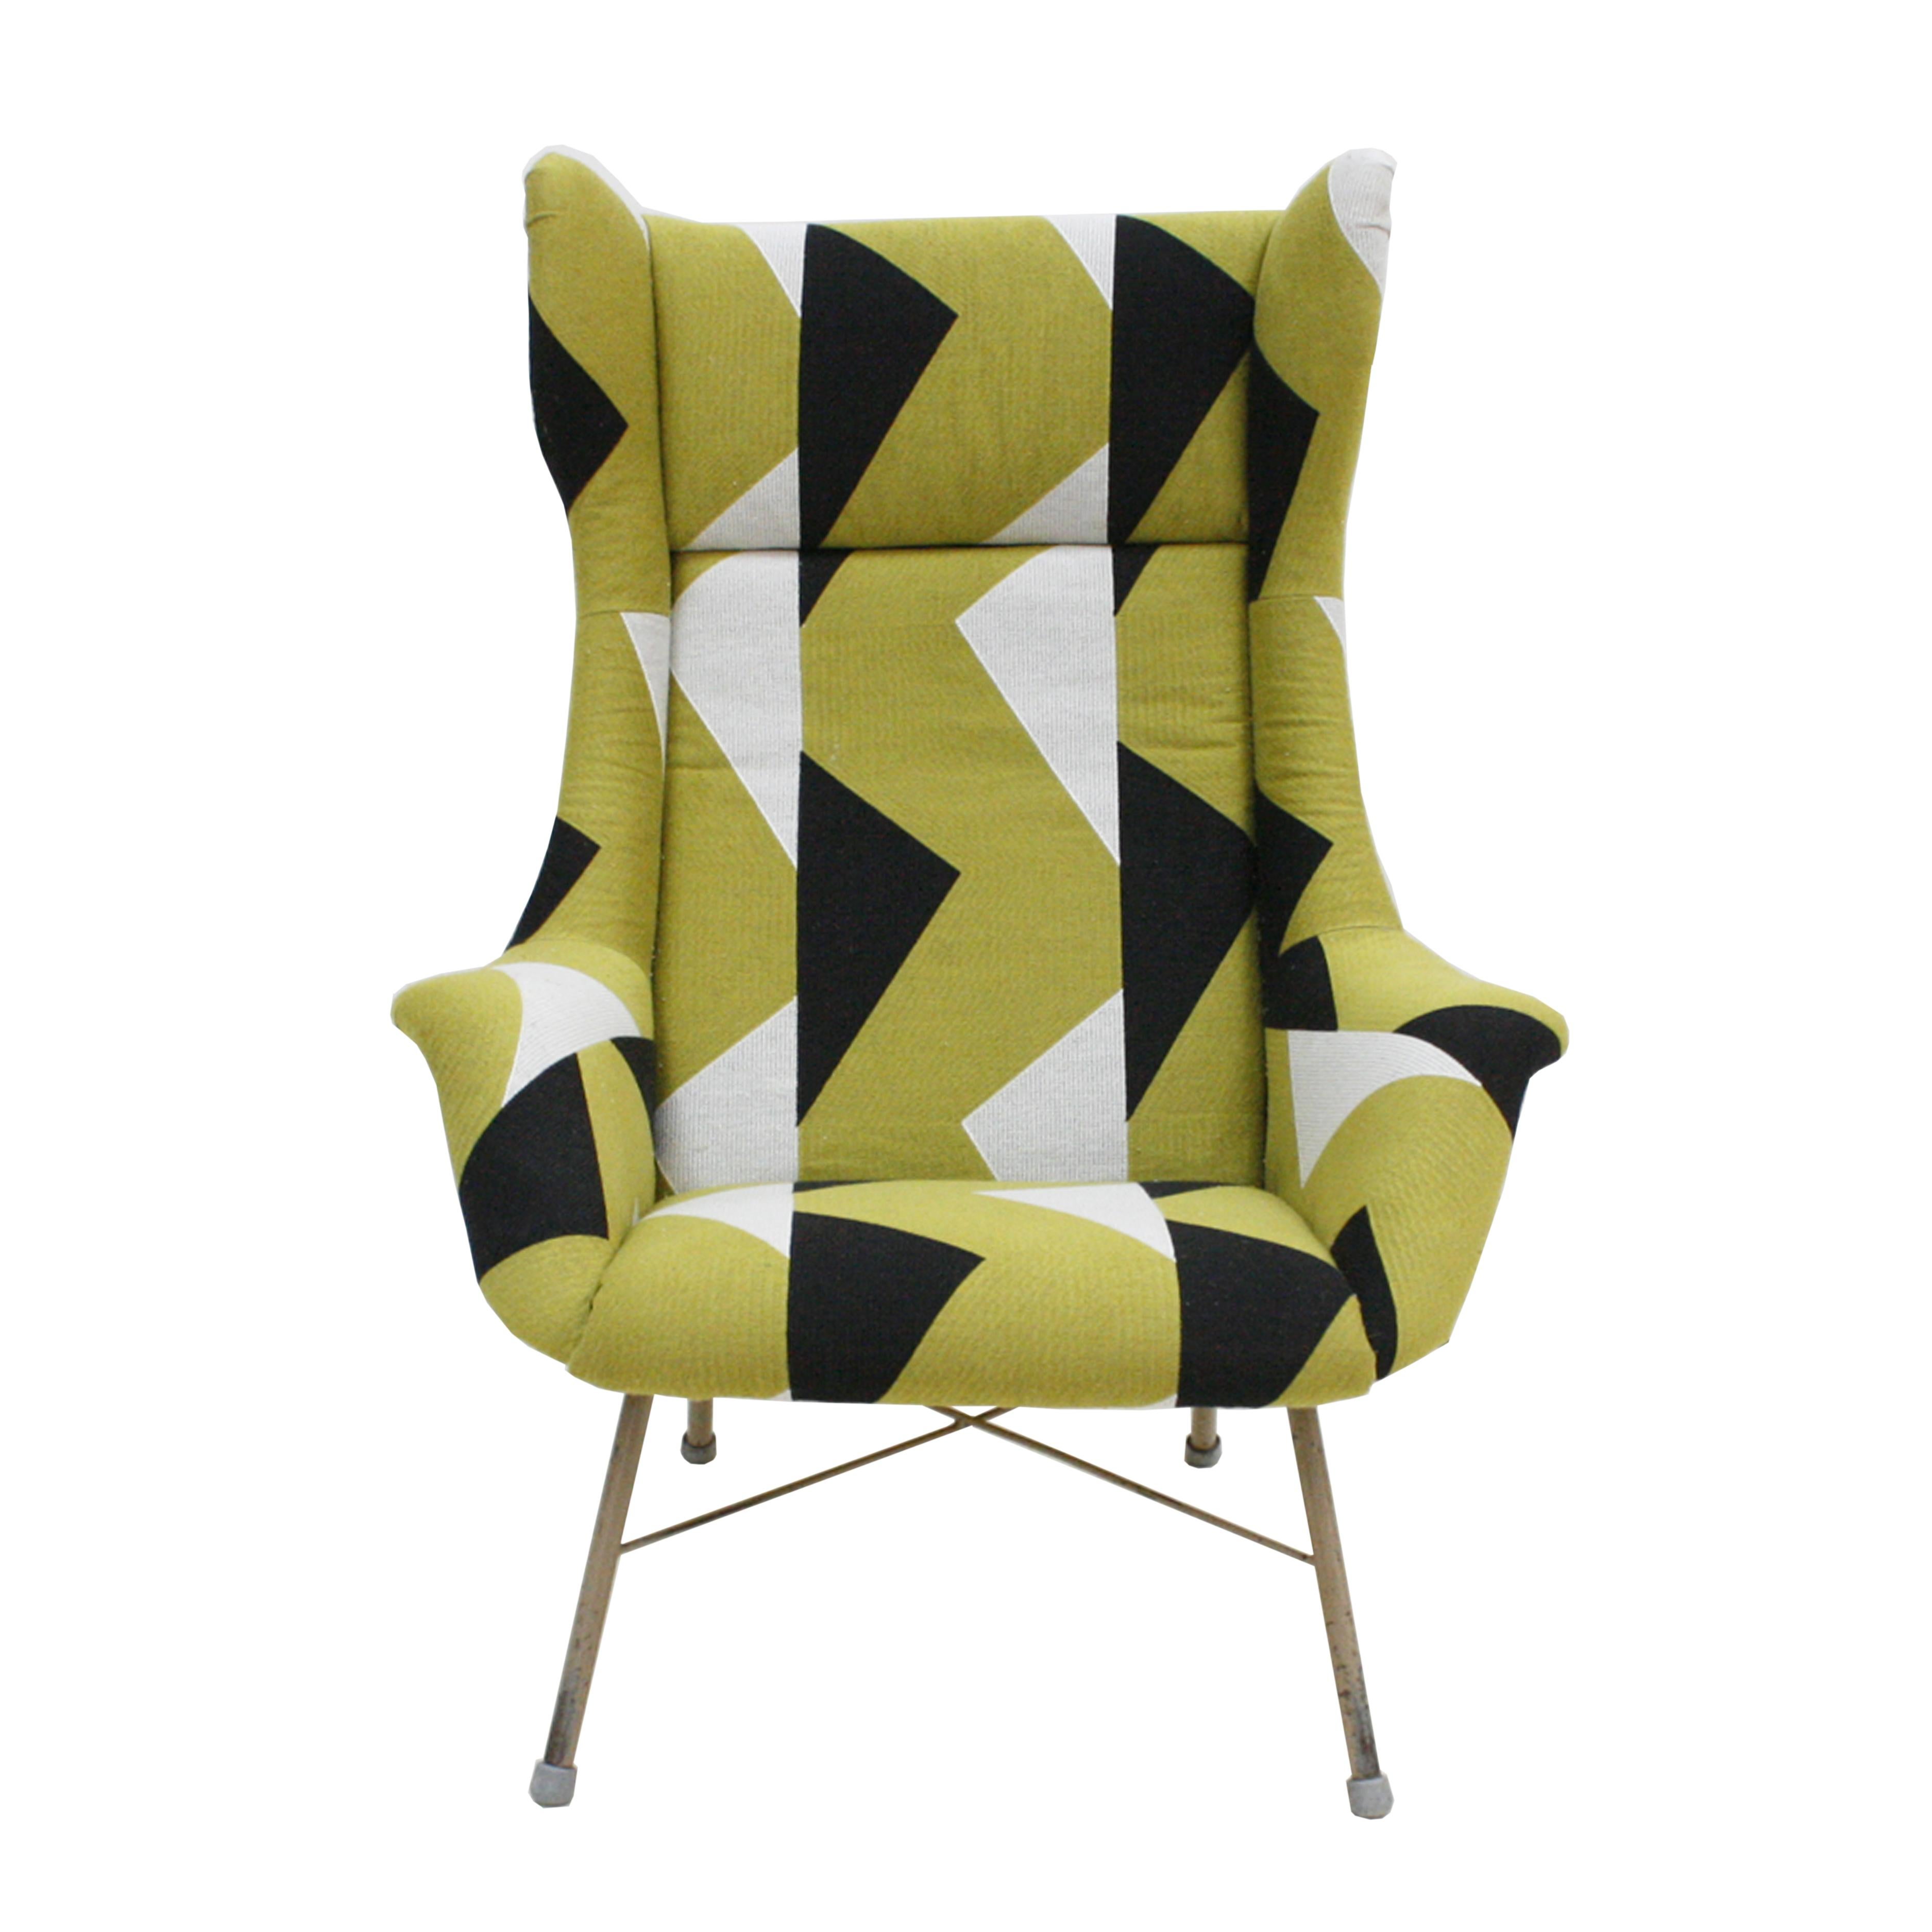 Mid-Century Modern armchair designed by Miroslav Navratil. Made of solid wood structure, reupholstered in pattern cotton fabric model 